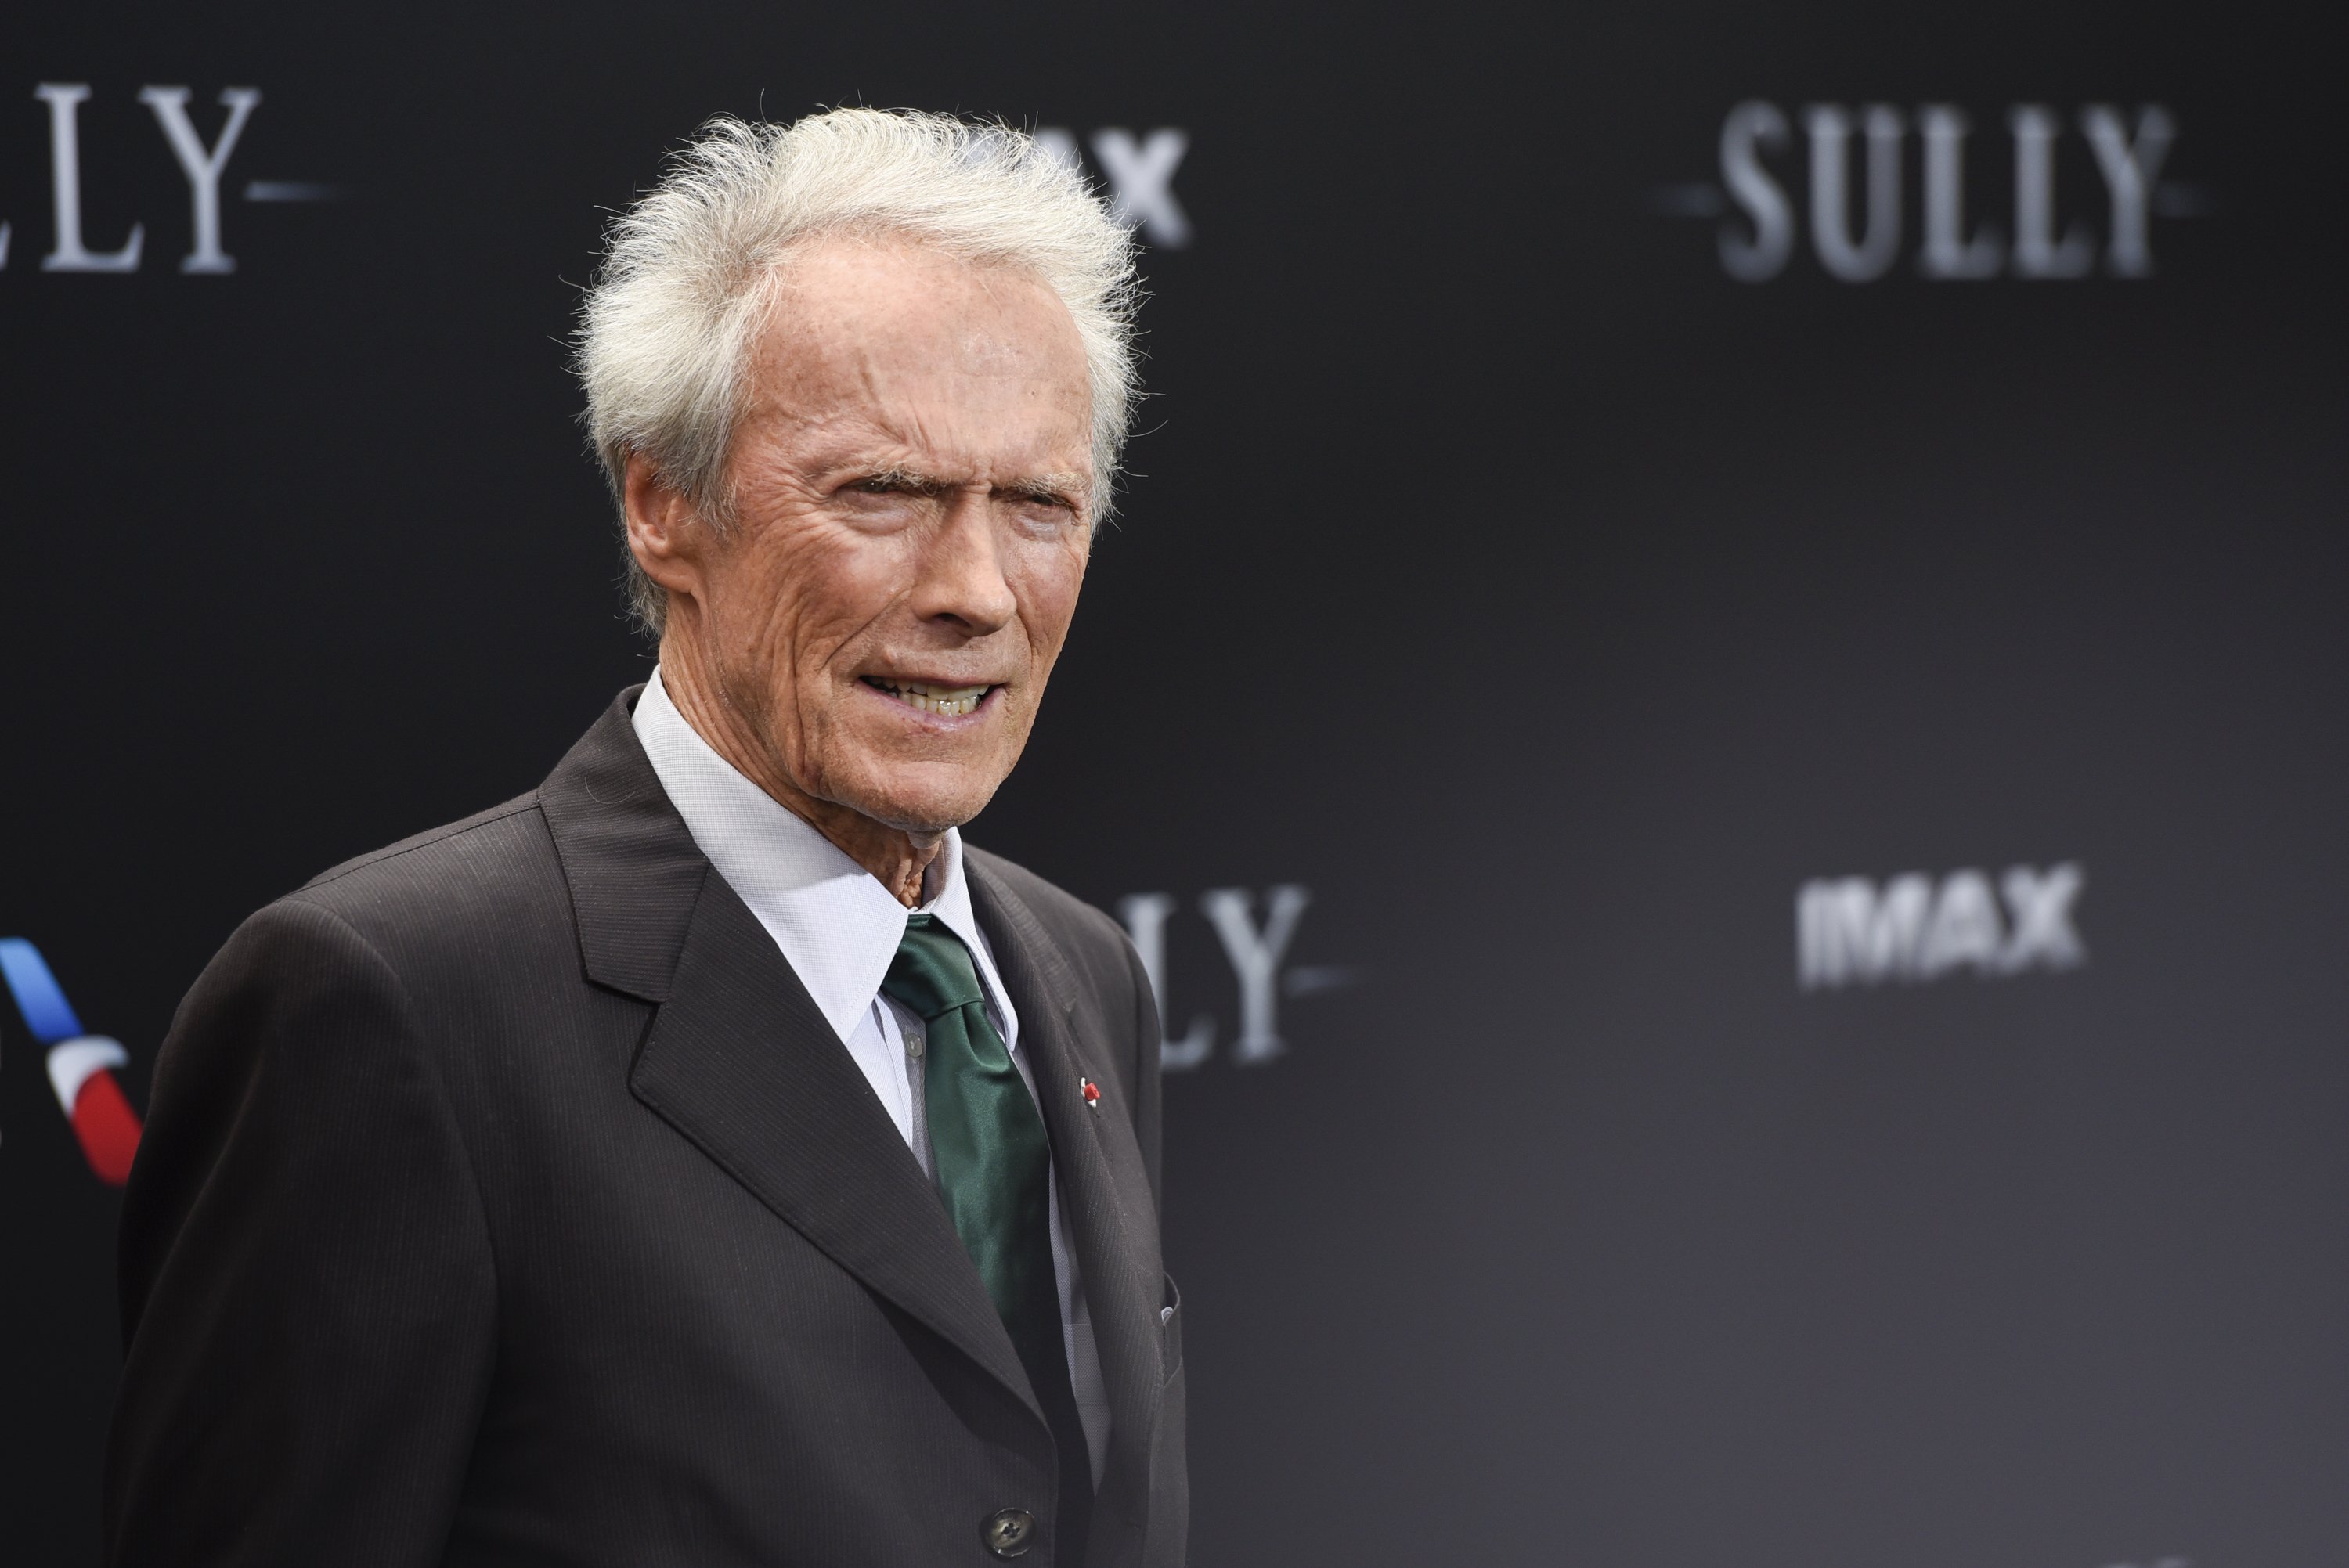 Clint Eastwood attends the premiere of "Sully" in New York City on September 6, 2016 | Photo: Getty Images